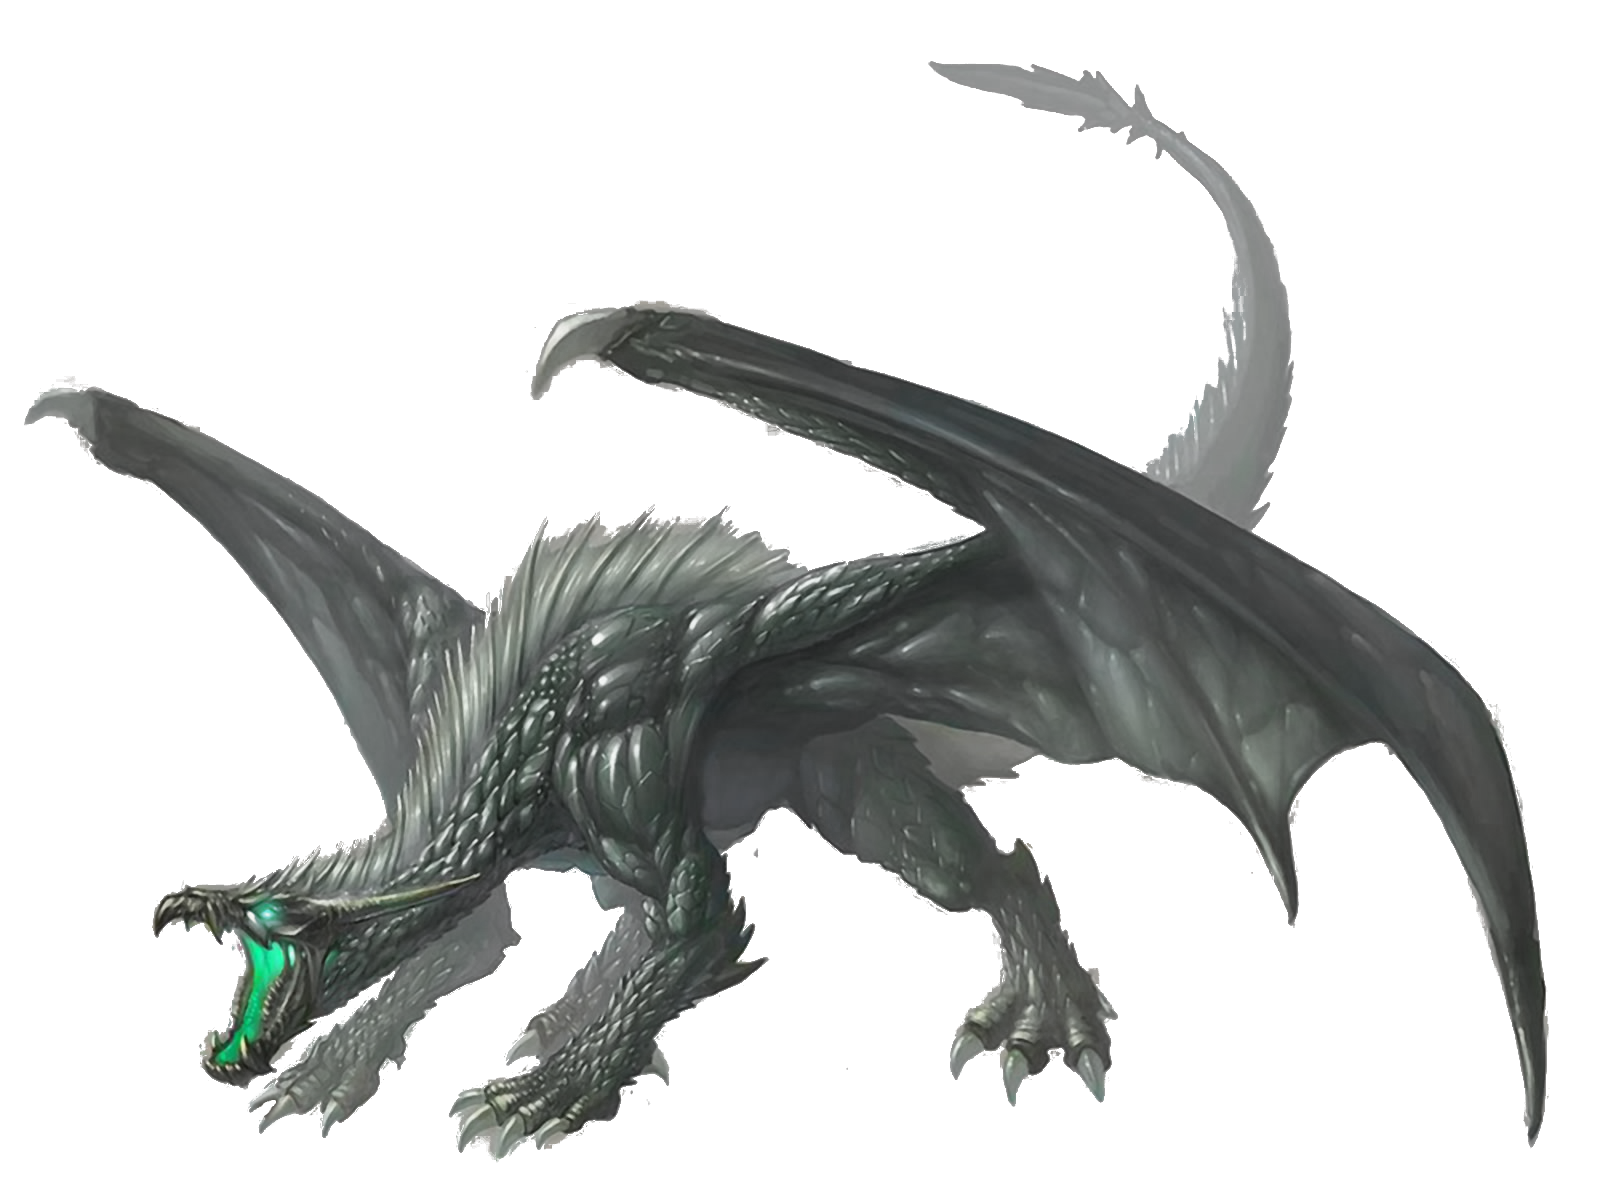 Dragon png images. Image gray blades and